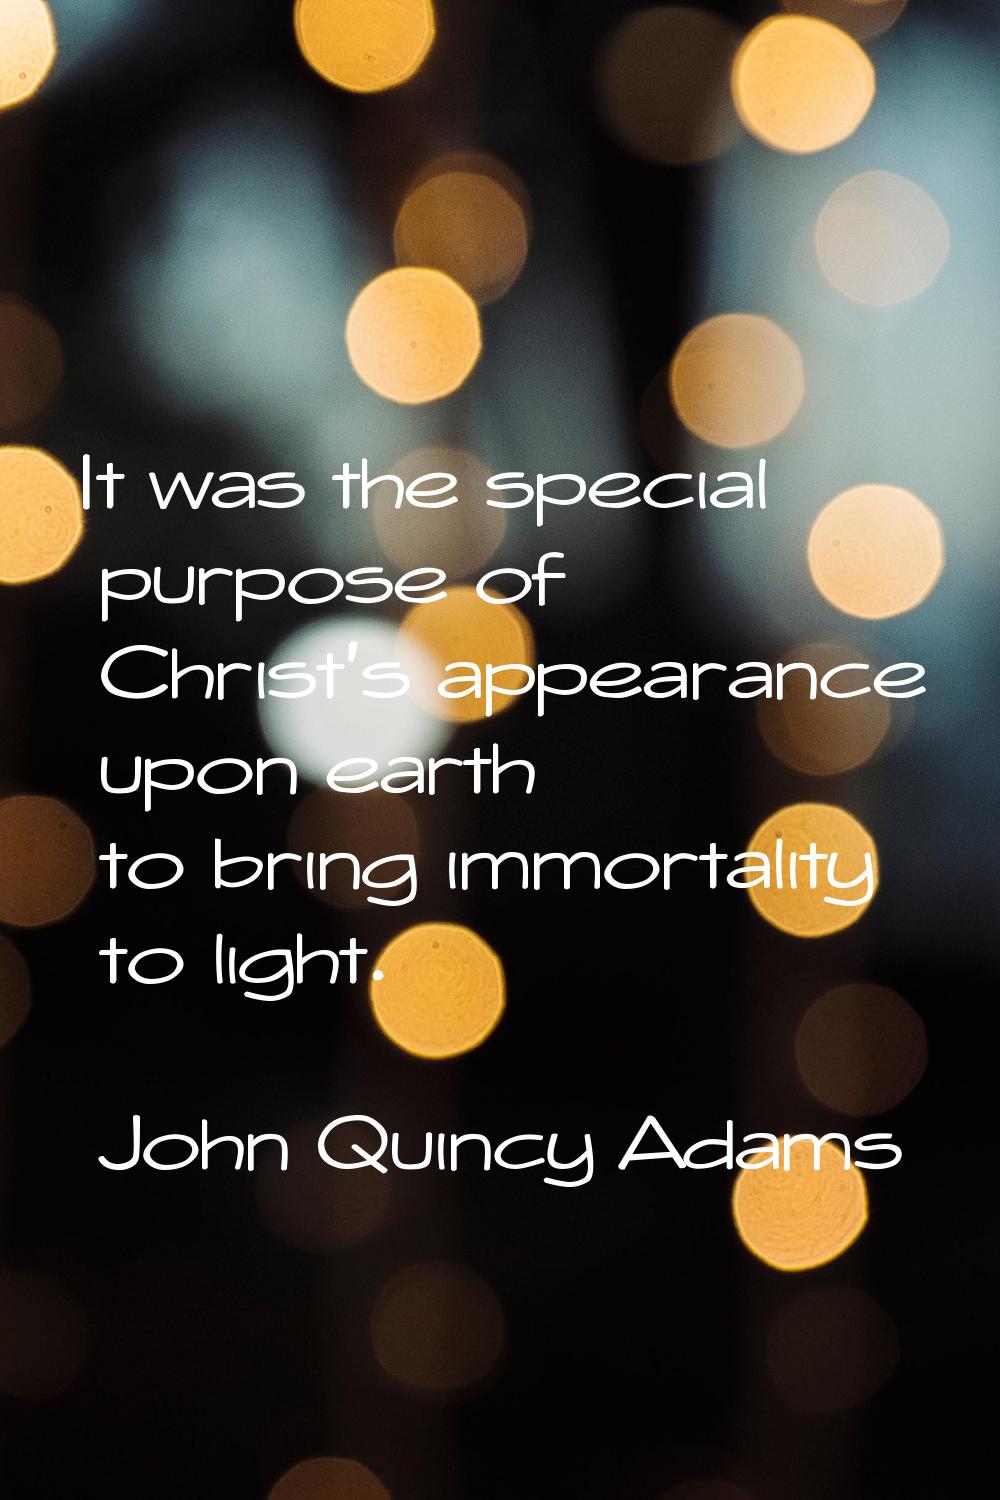 It was the special purpose of Christ's appearance upon earth to bring immortality to light.